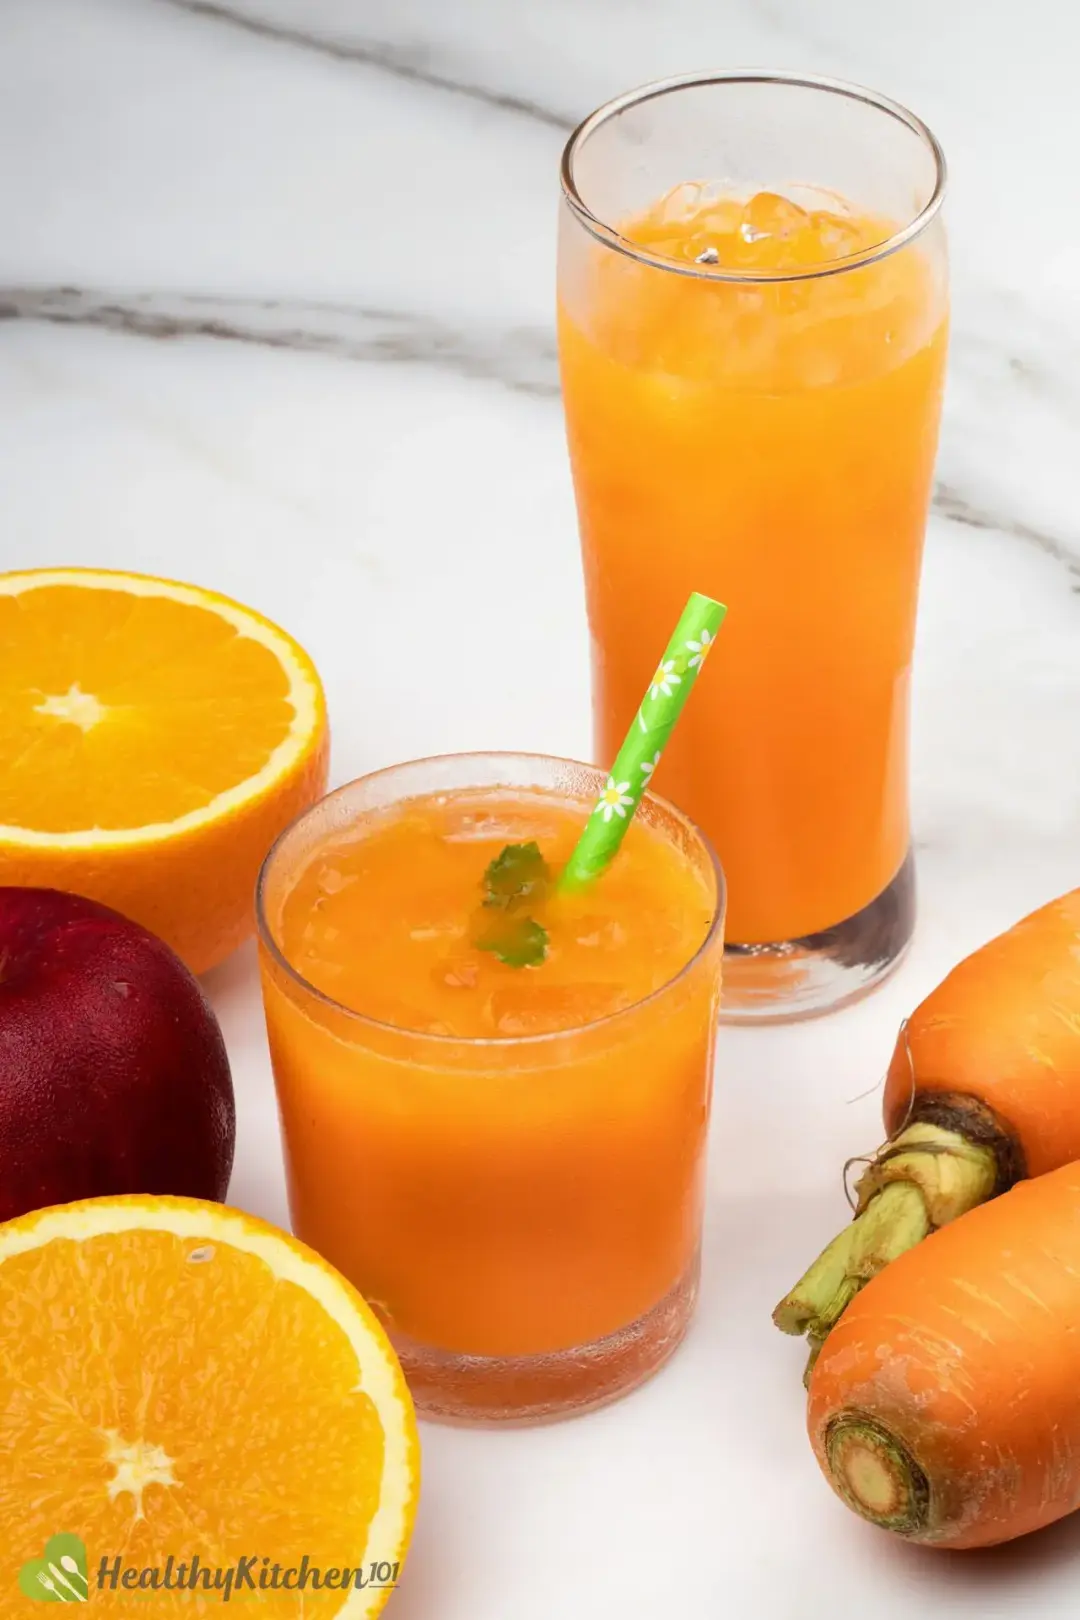 A short glass of iced orange carrot juice next to a tall glass of carrot drink, a red apple, two orange halves, and carrots